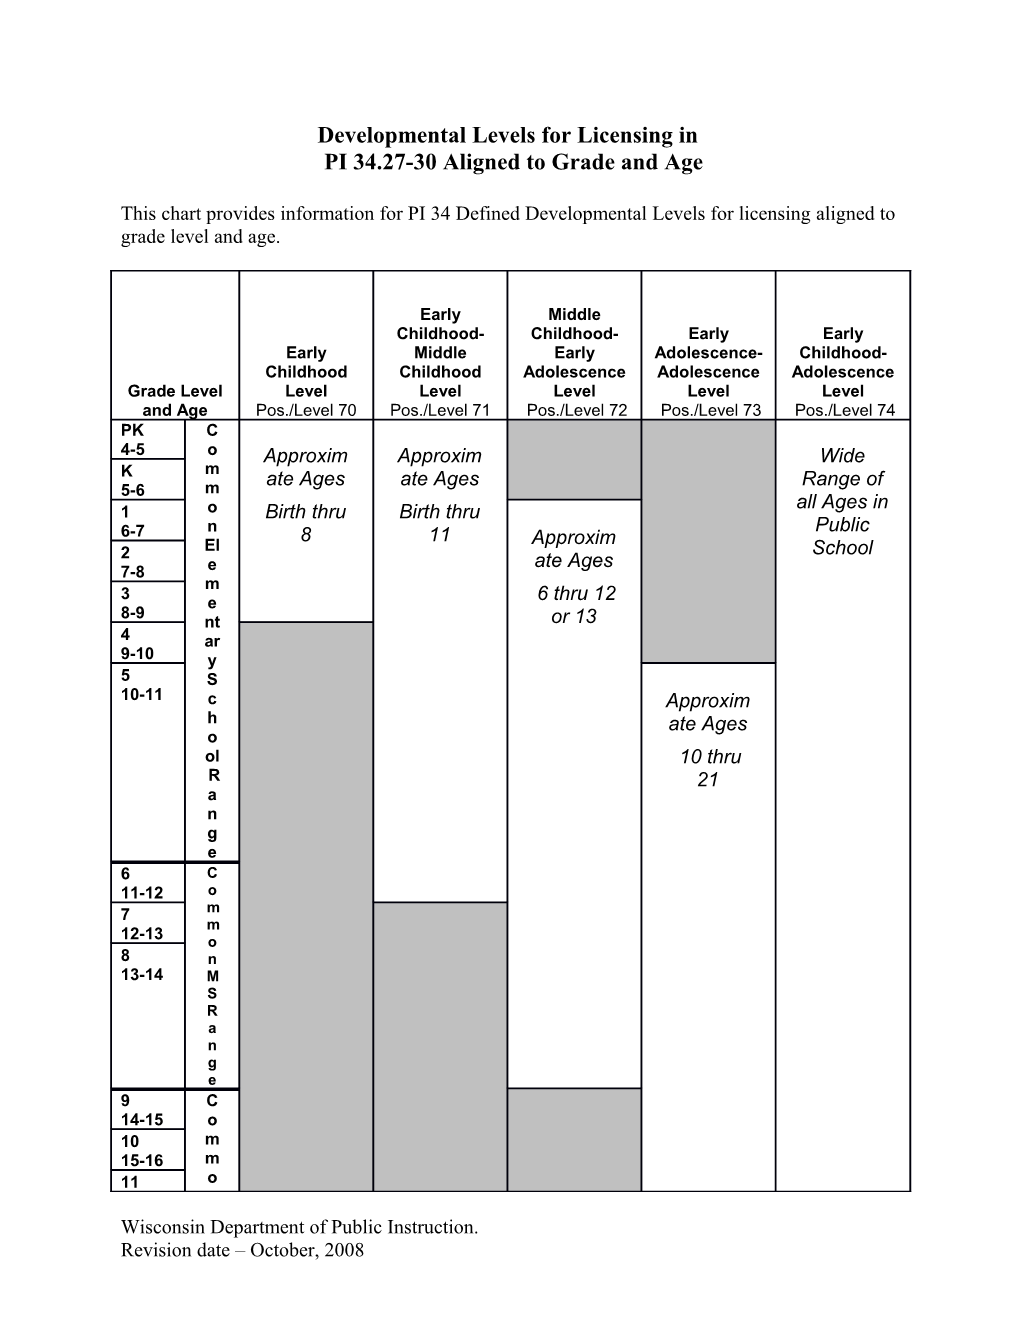 Developmental Levels Aligned to Grade and Age